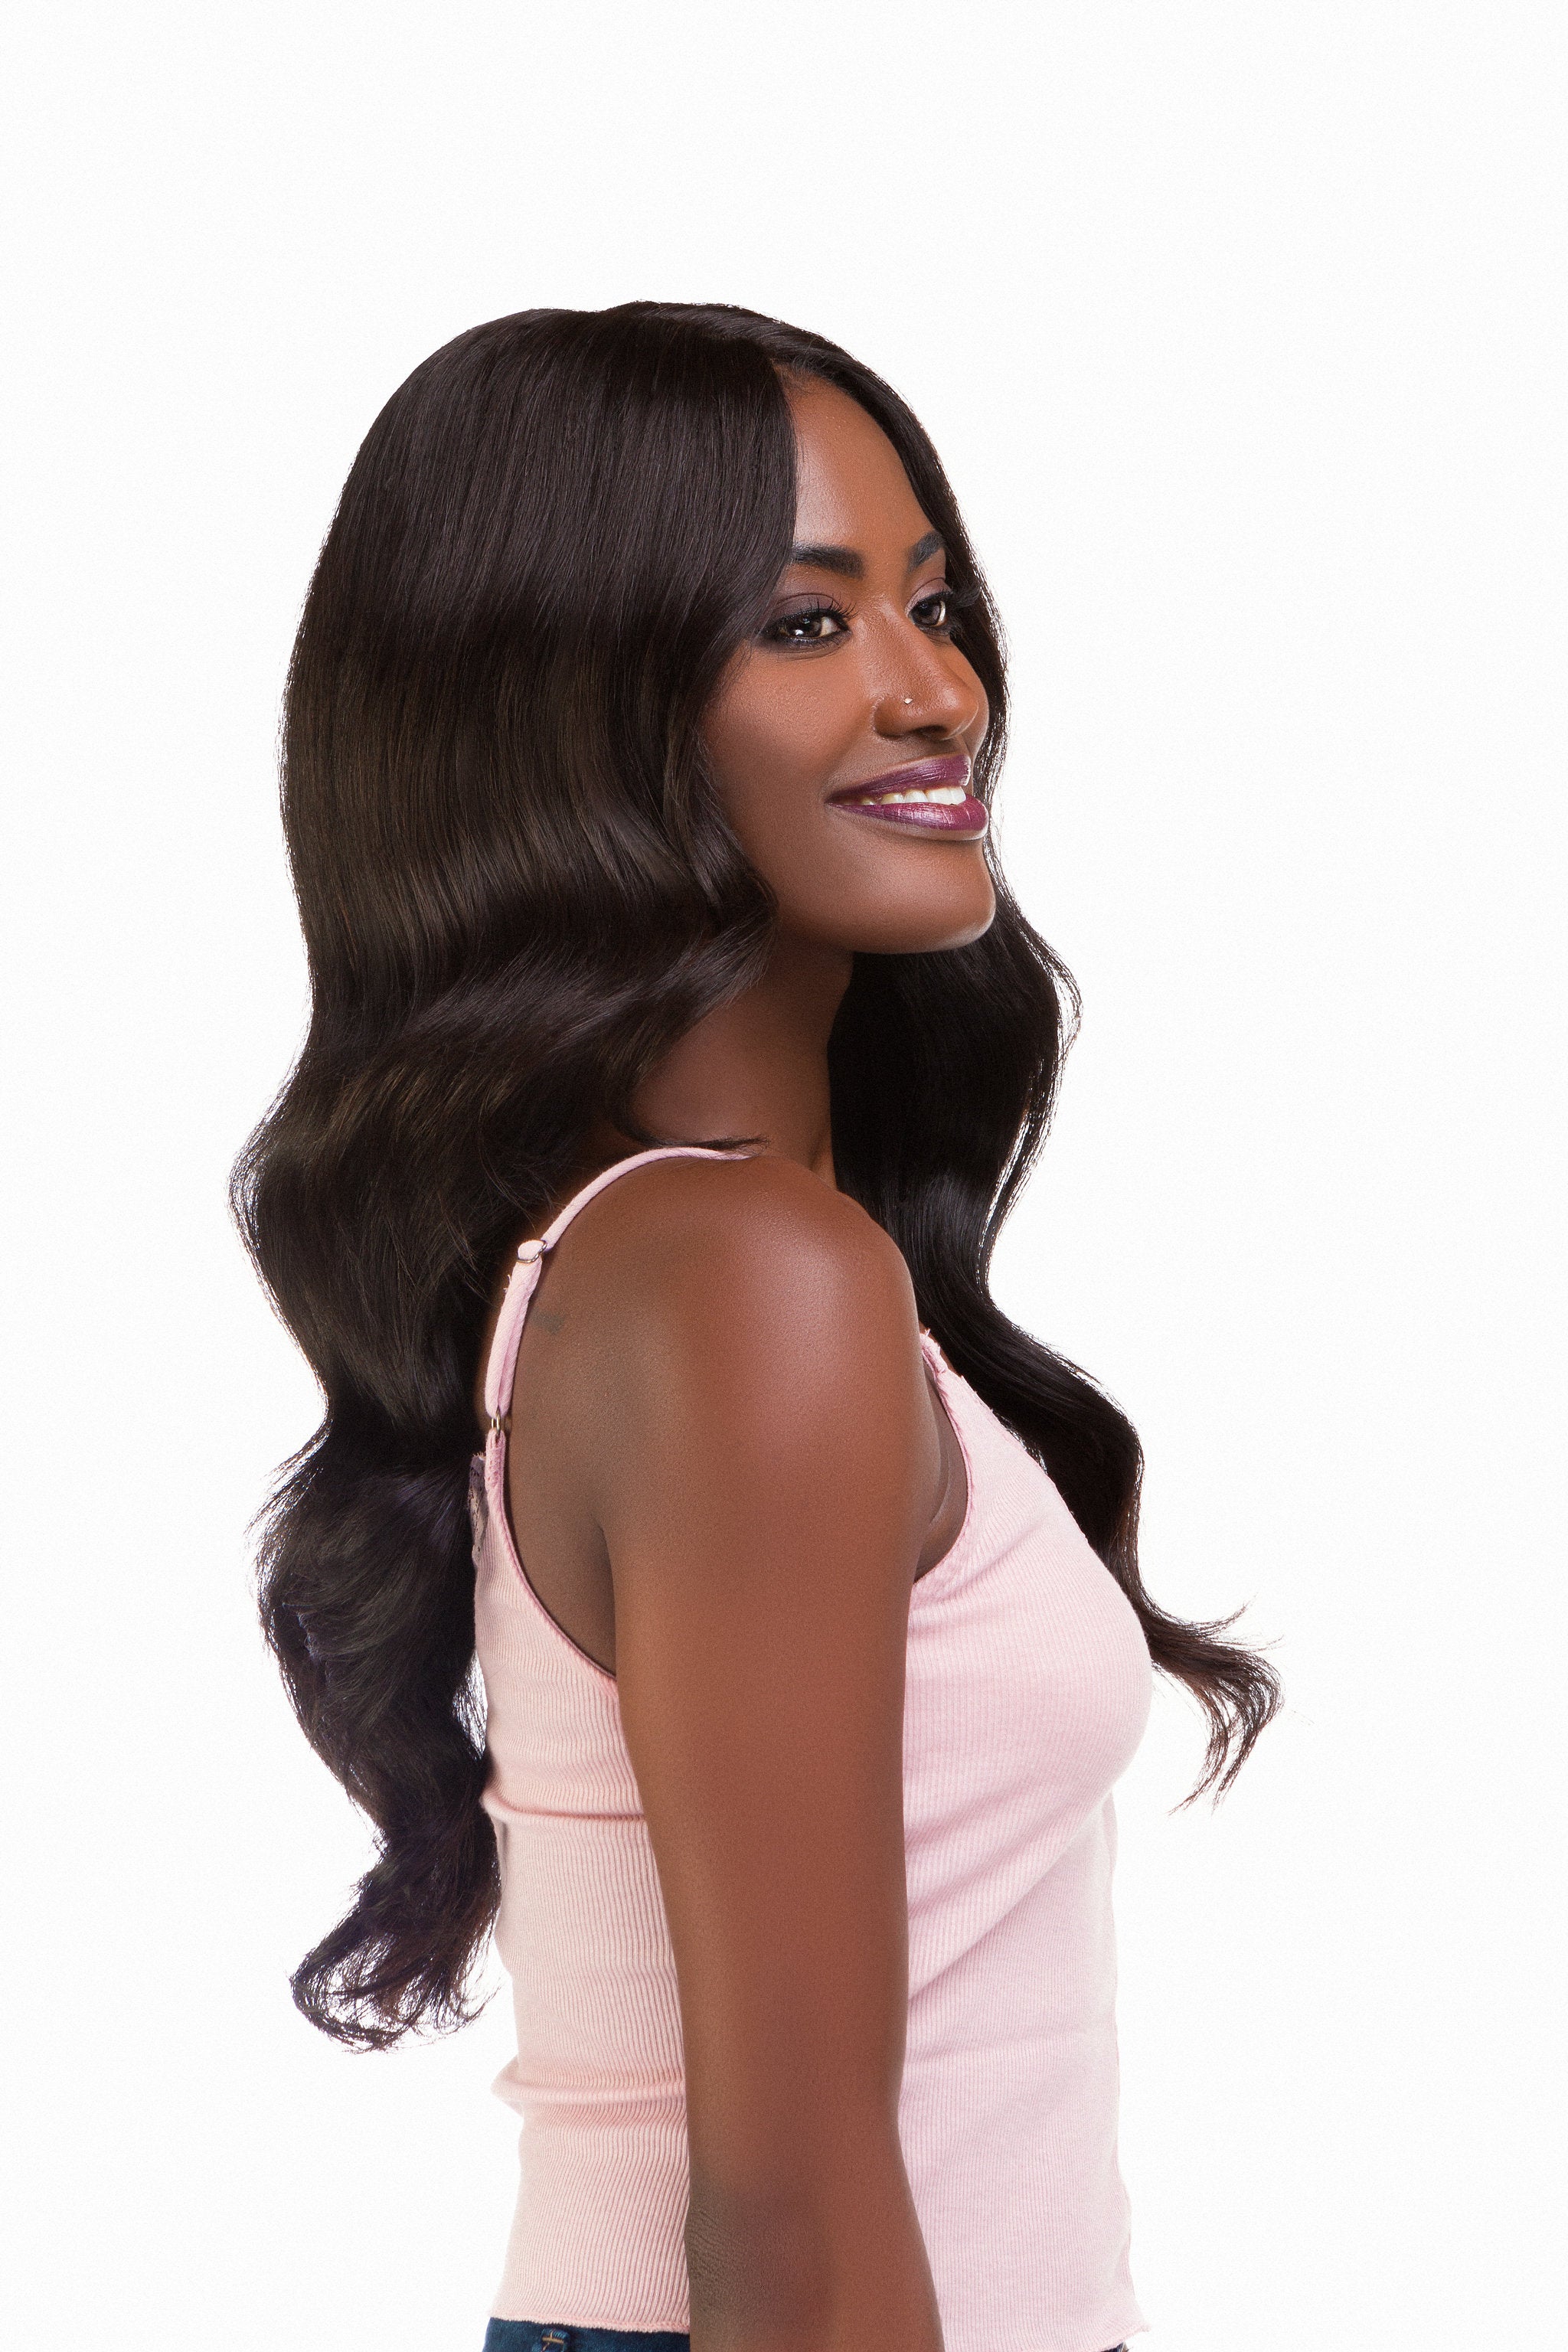 Brazilian Hair Extensions Can Give You Fuller, More Luxurious Hair